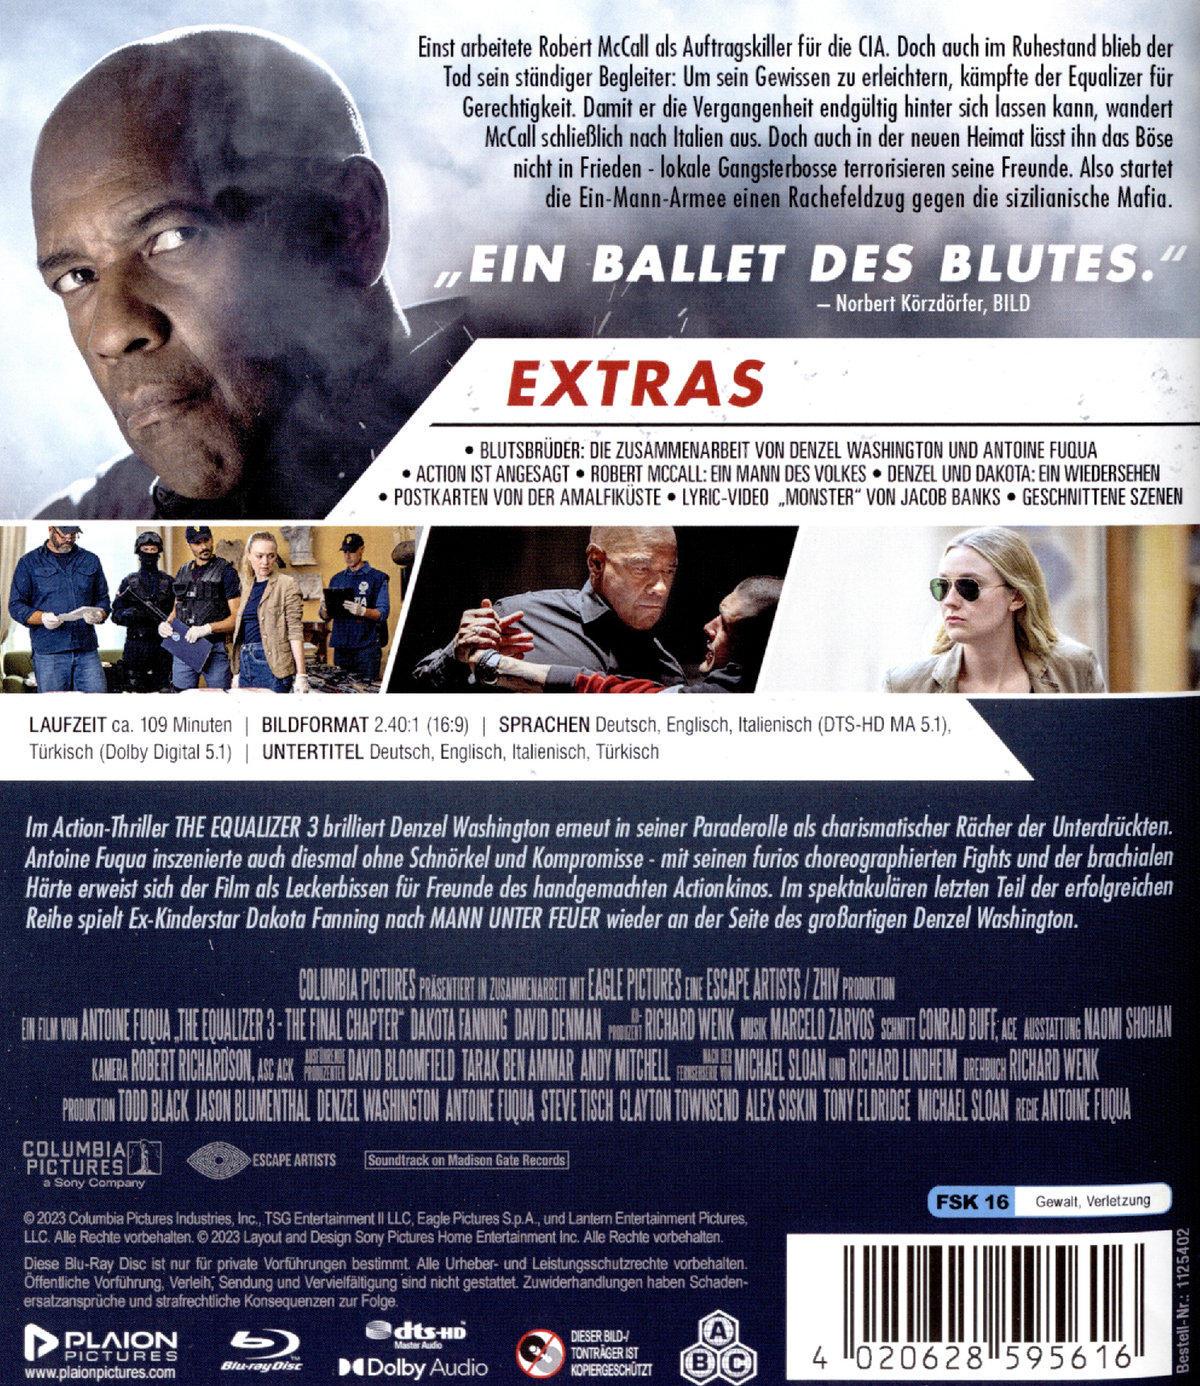 The Equalizer 3 - The Final Chapter  (Blu-ray Disc)